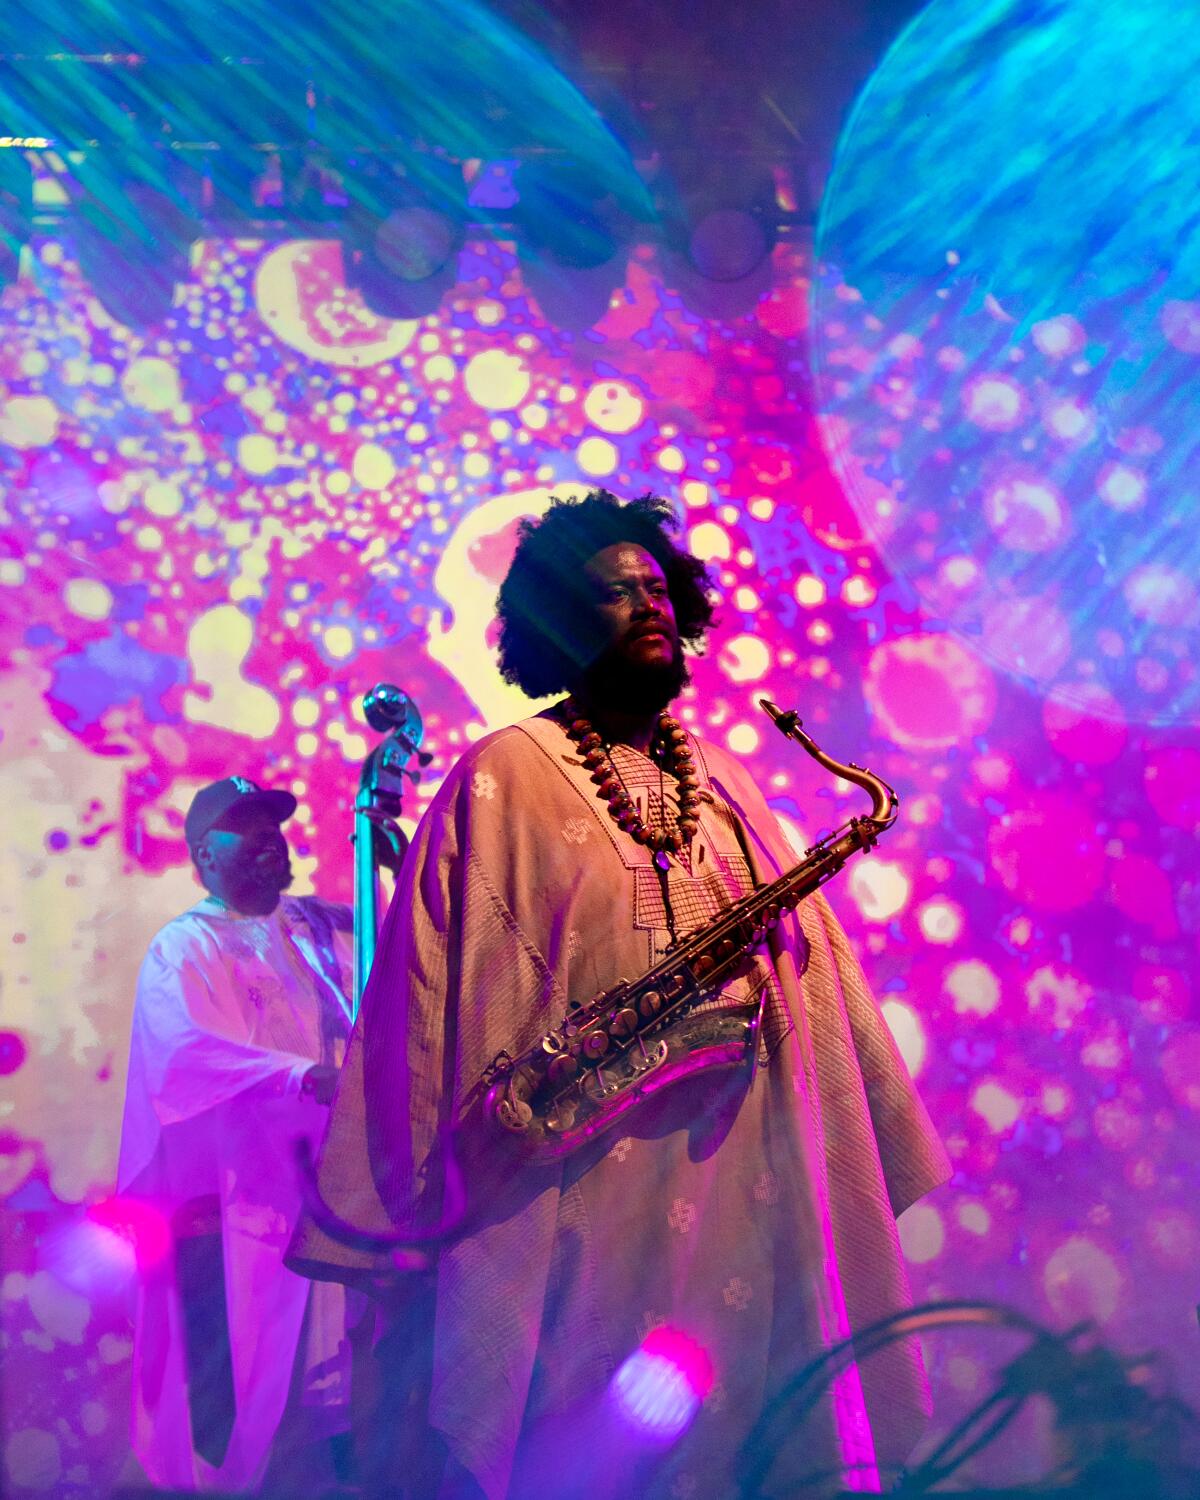 A saxophone player in a dashiki stands in front of a psychedelic backdrop